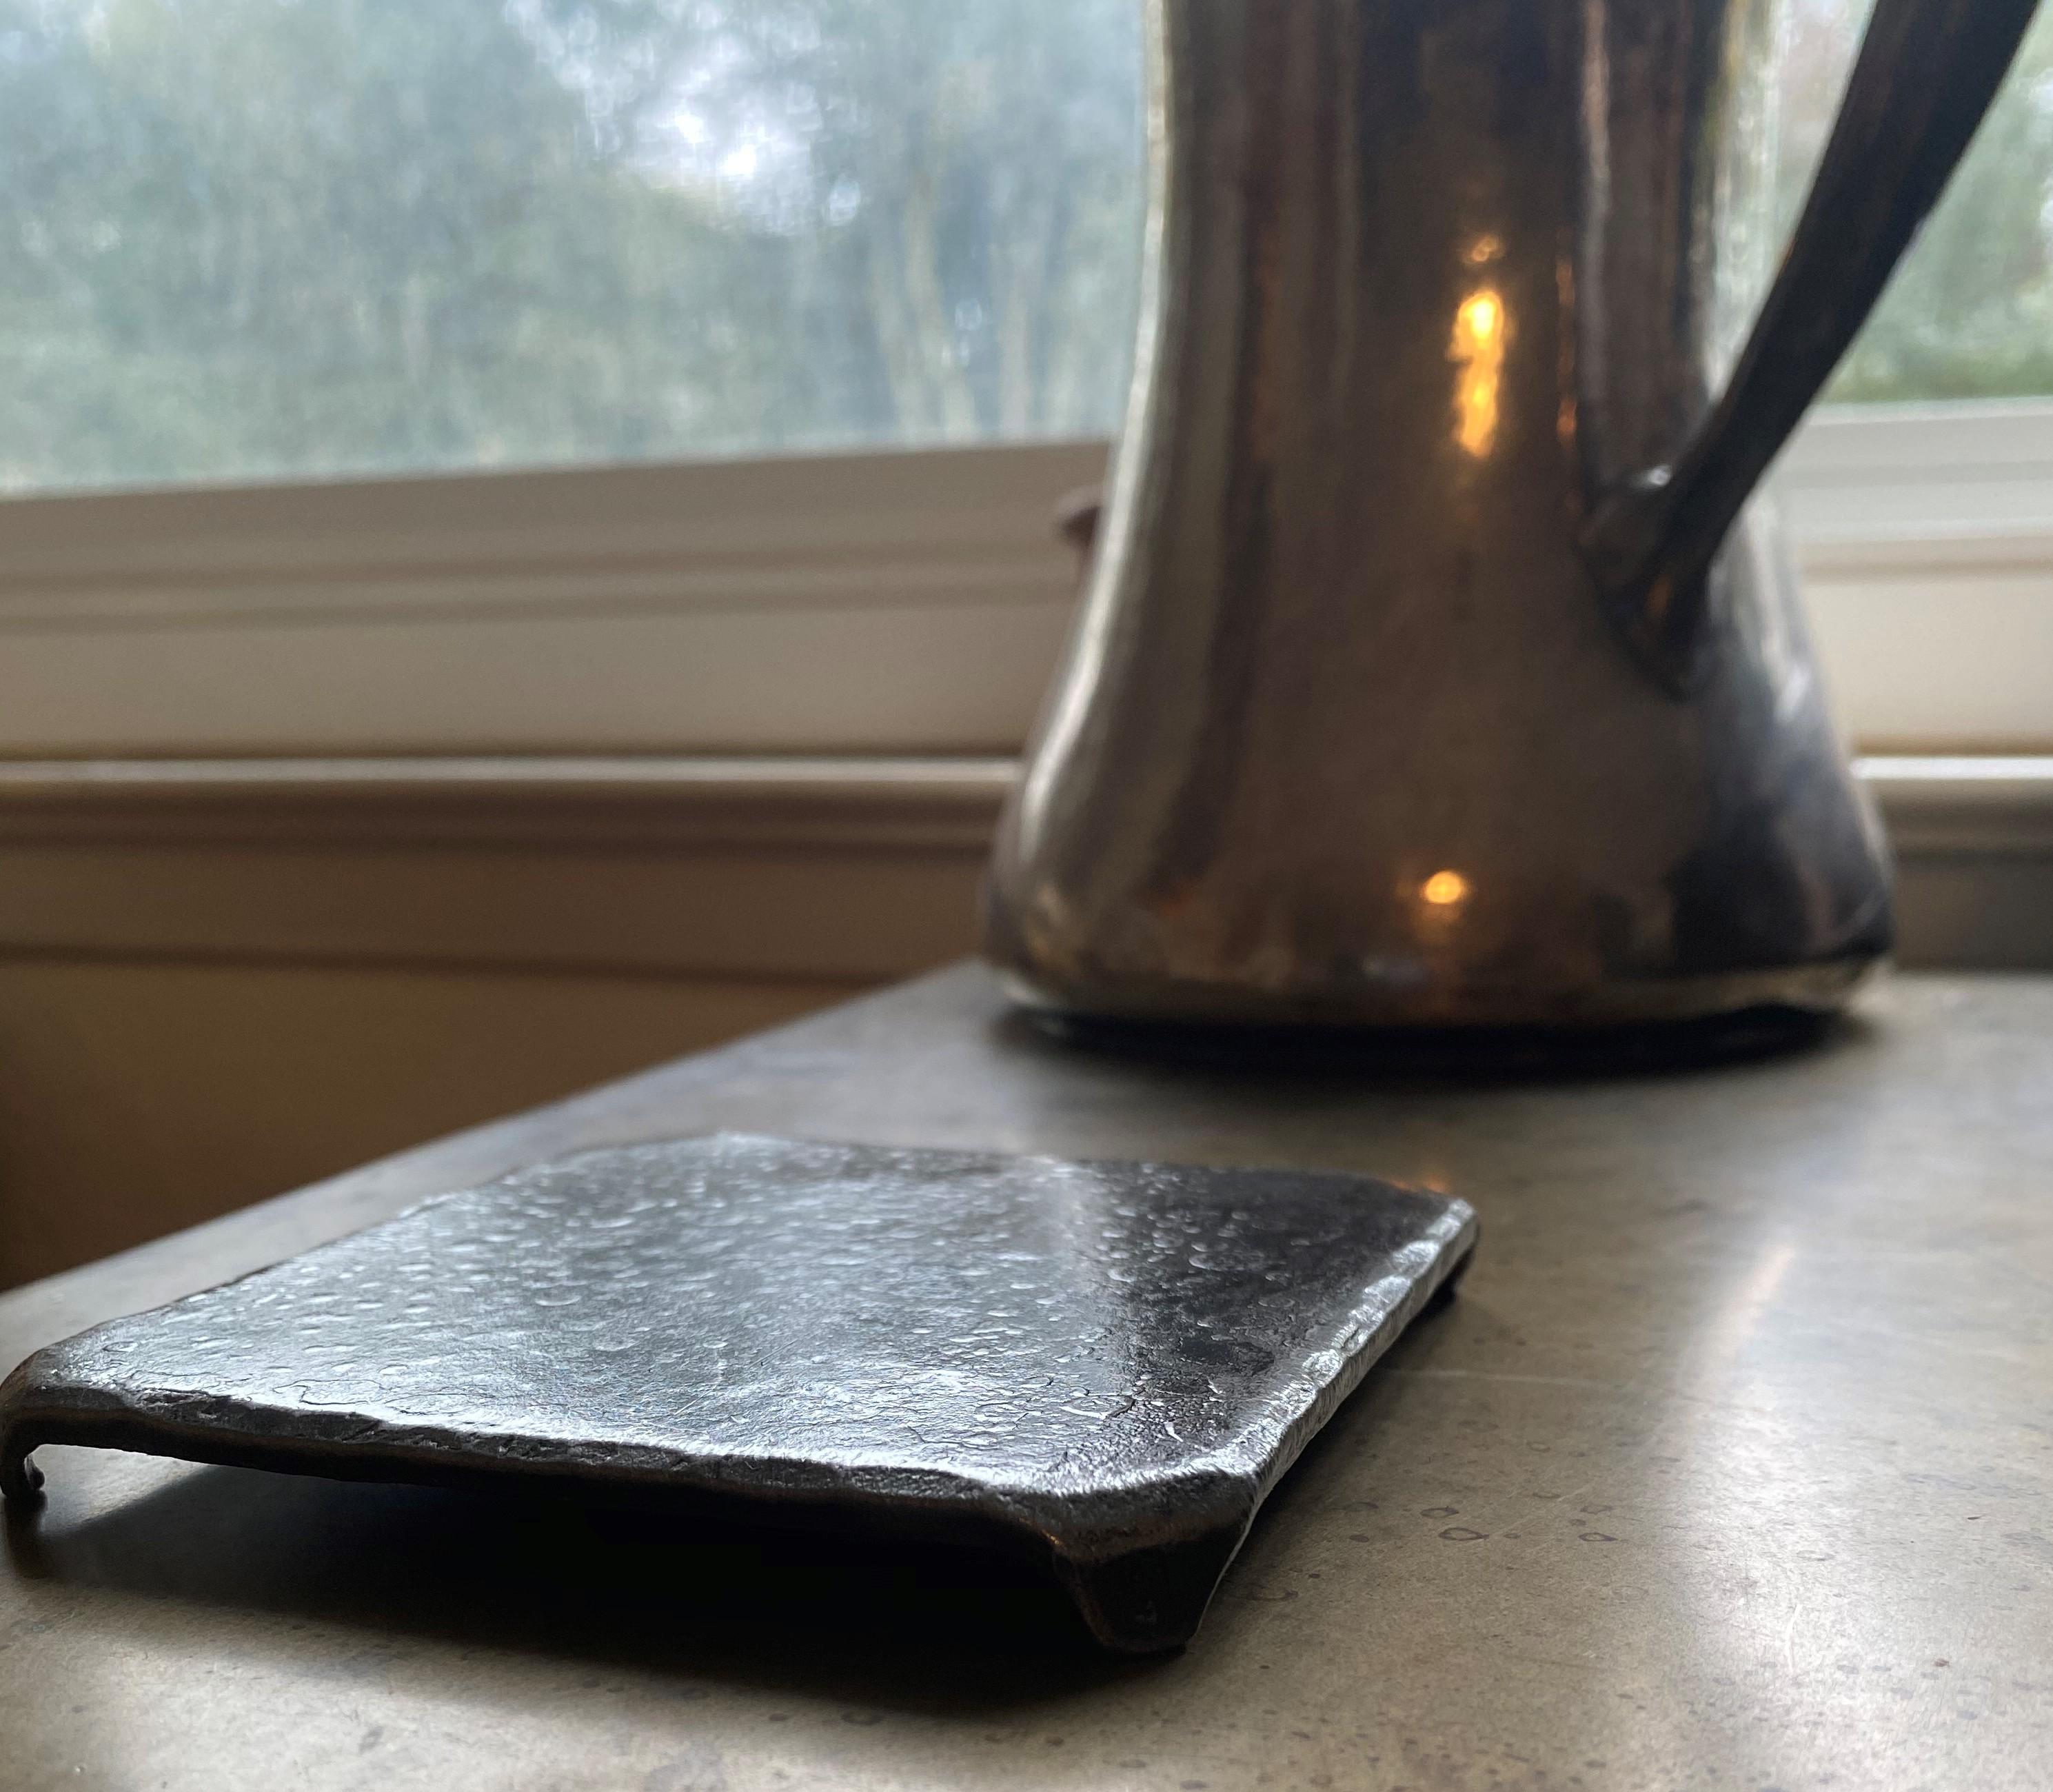 These custom handcrafted, steel square coasters with hammered, beveled edges are a beautiful edition to your coffee table. They are carefully wire brushed and sanded to accentuate the forged details of design. A glossy clear coat enhances the